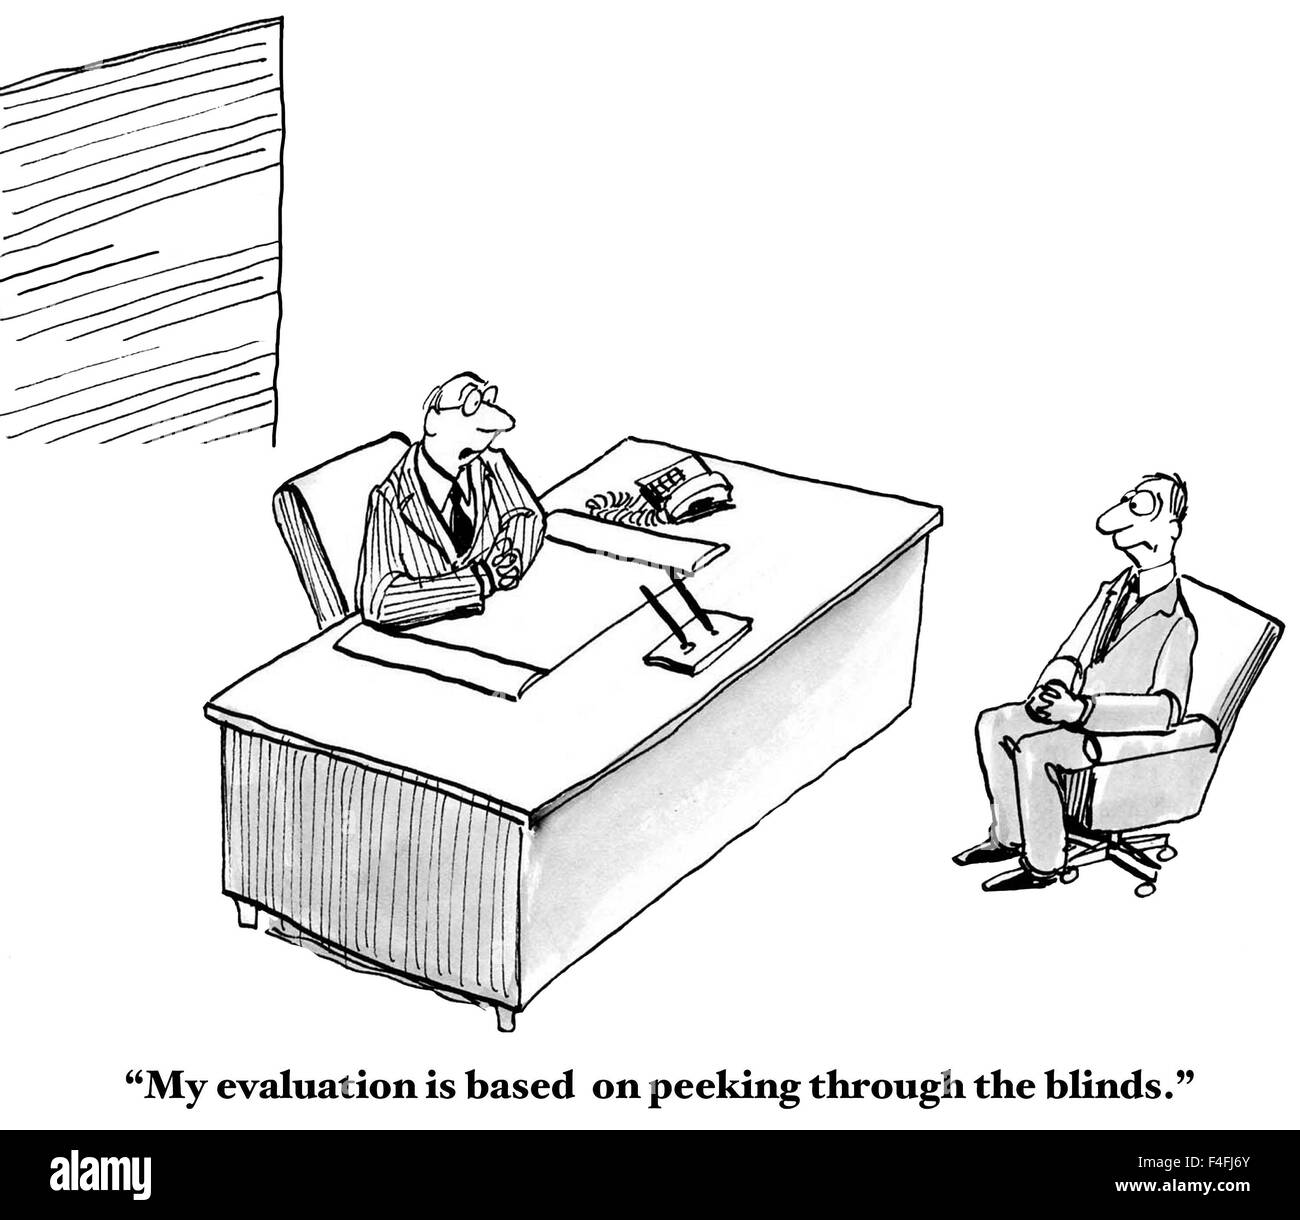 Professional cartoons of manager saying to worker, 'My evaluation is based on peeking through the blinds'. Stock Photo